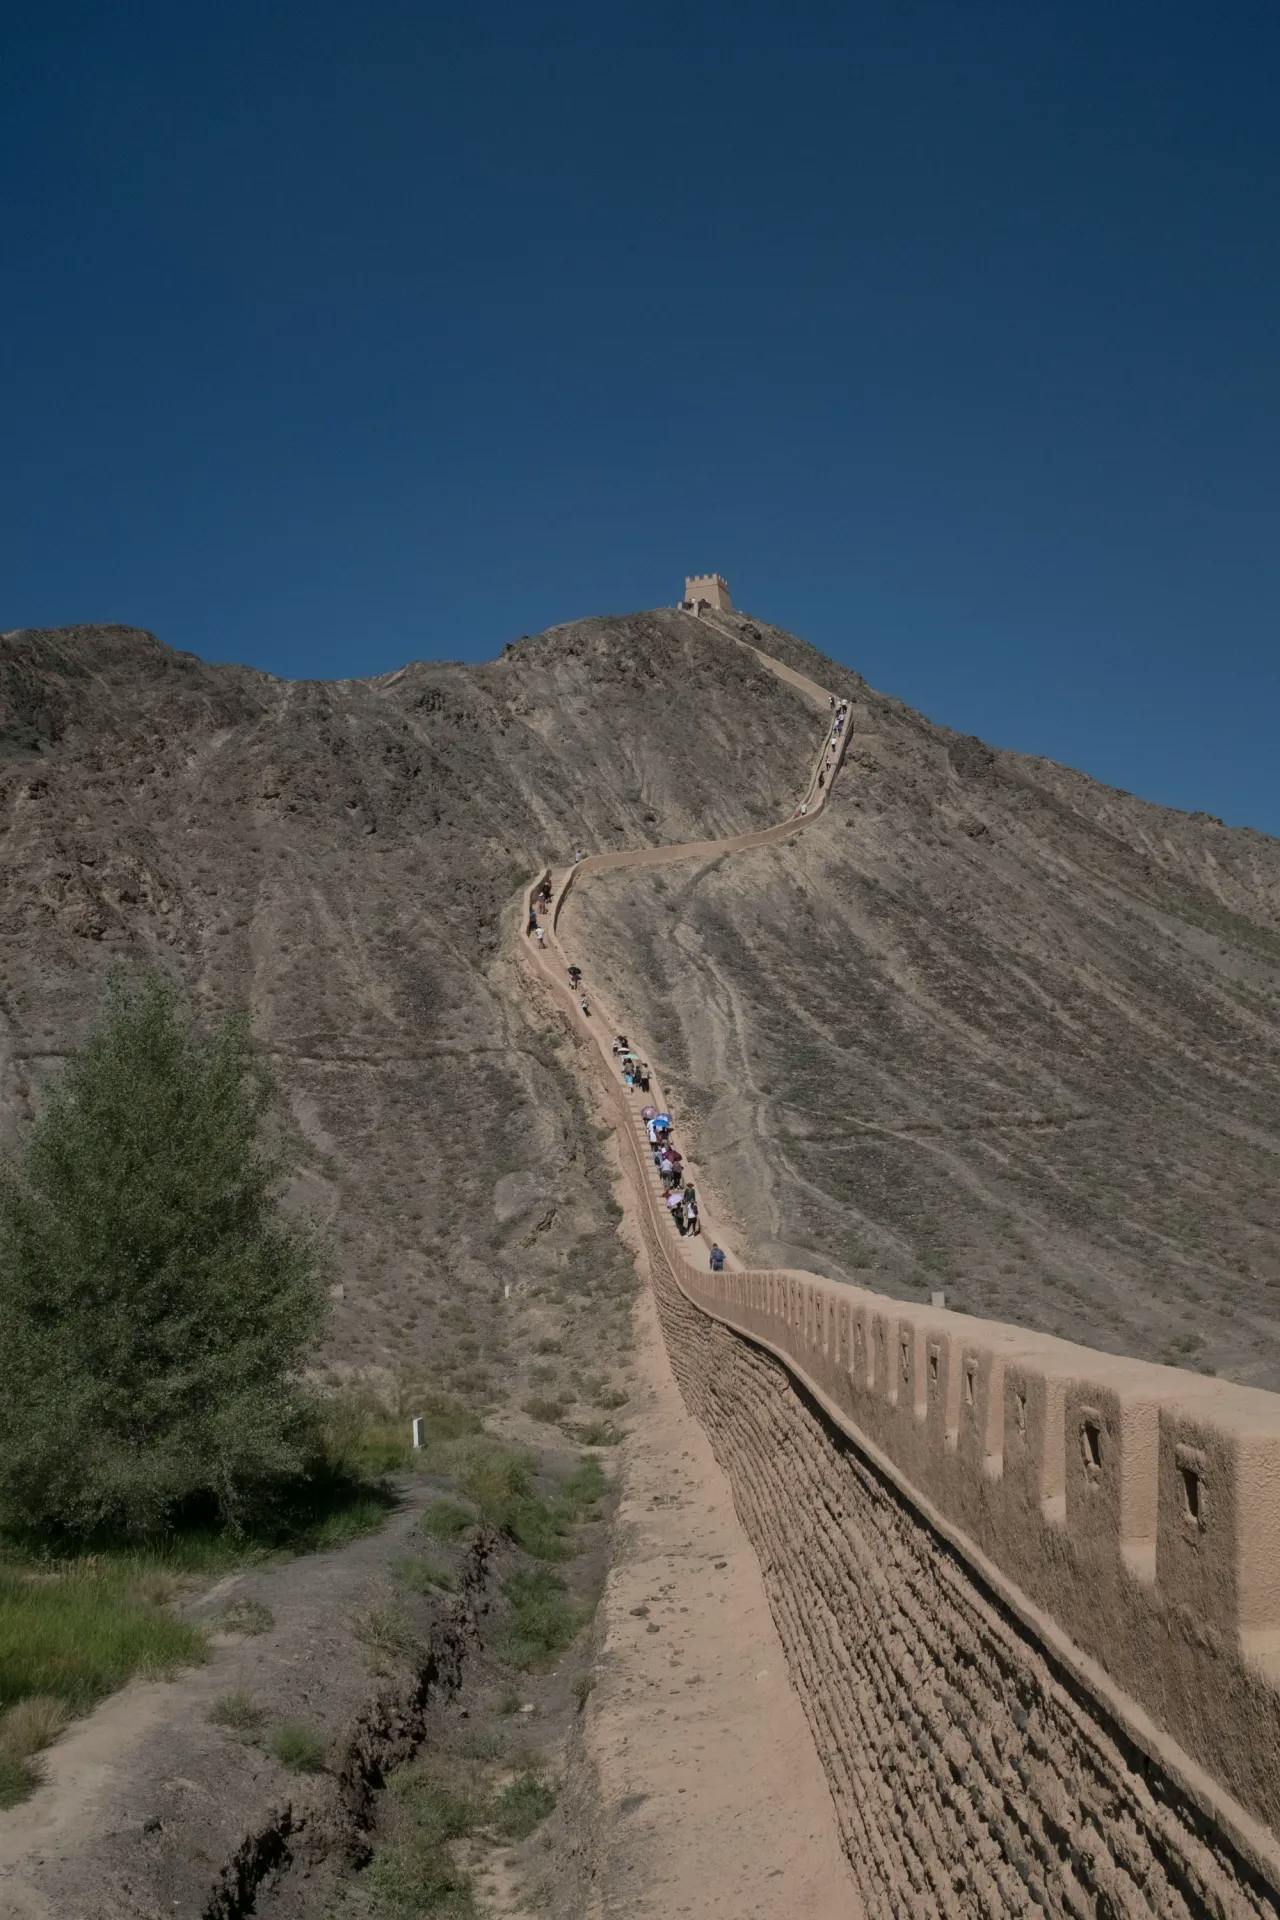 The great wall through the desert and over mountains - Gansu, China